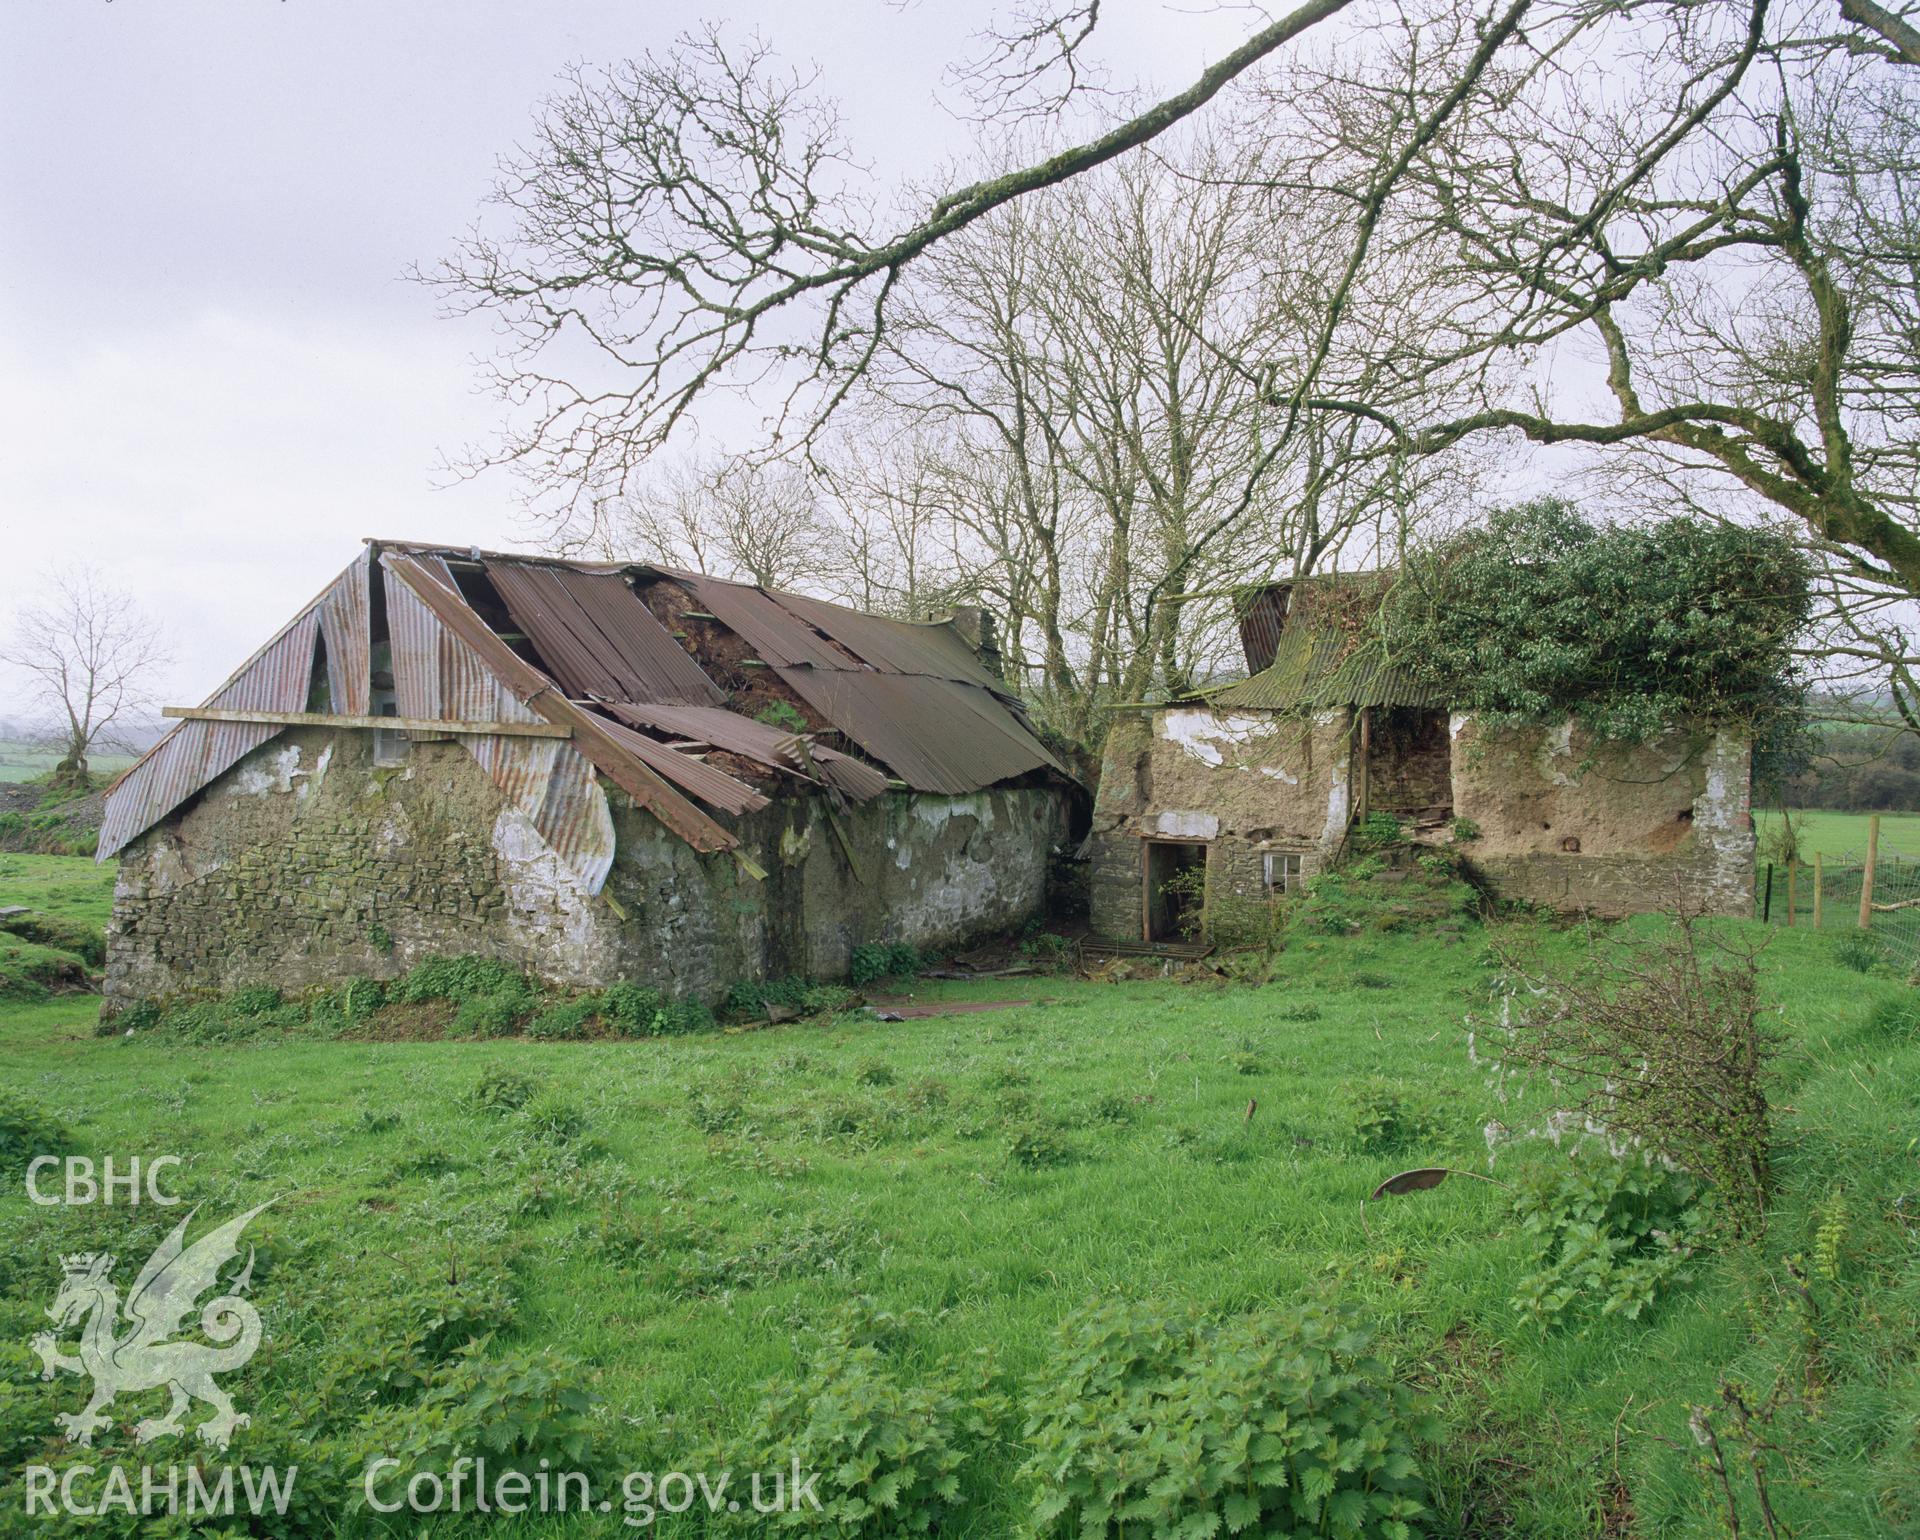 Colour transparency showing a view of Ynys-Felen, Ceredigion, produced by Iain Wright, June 2004.